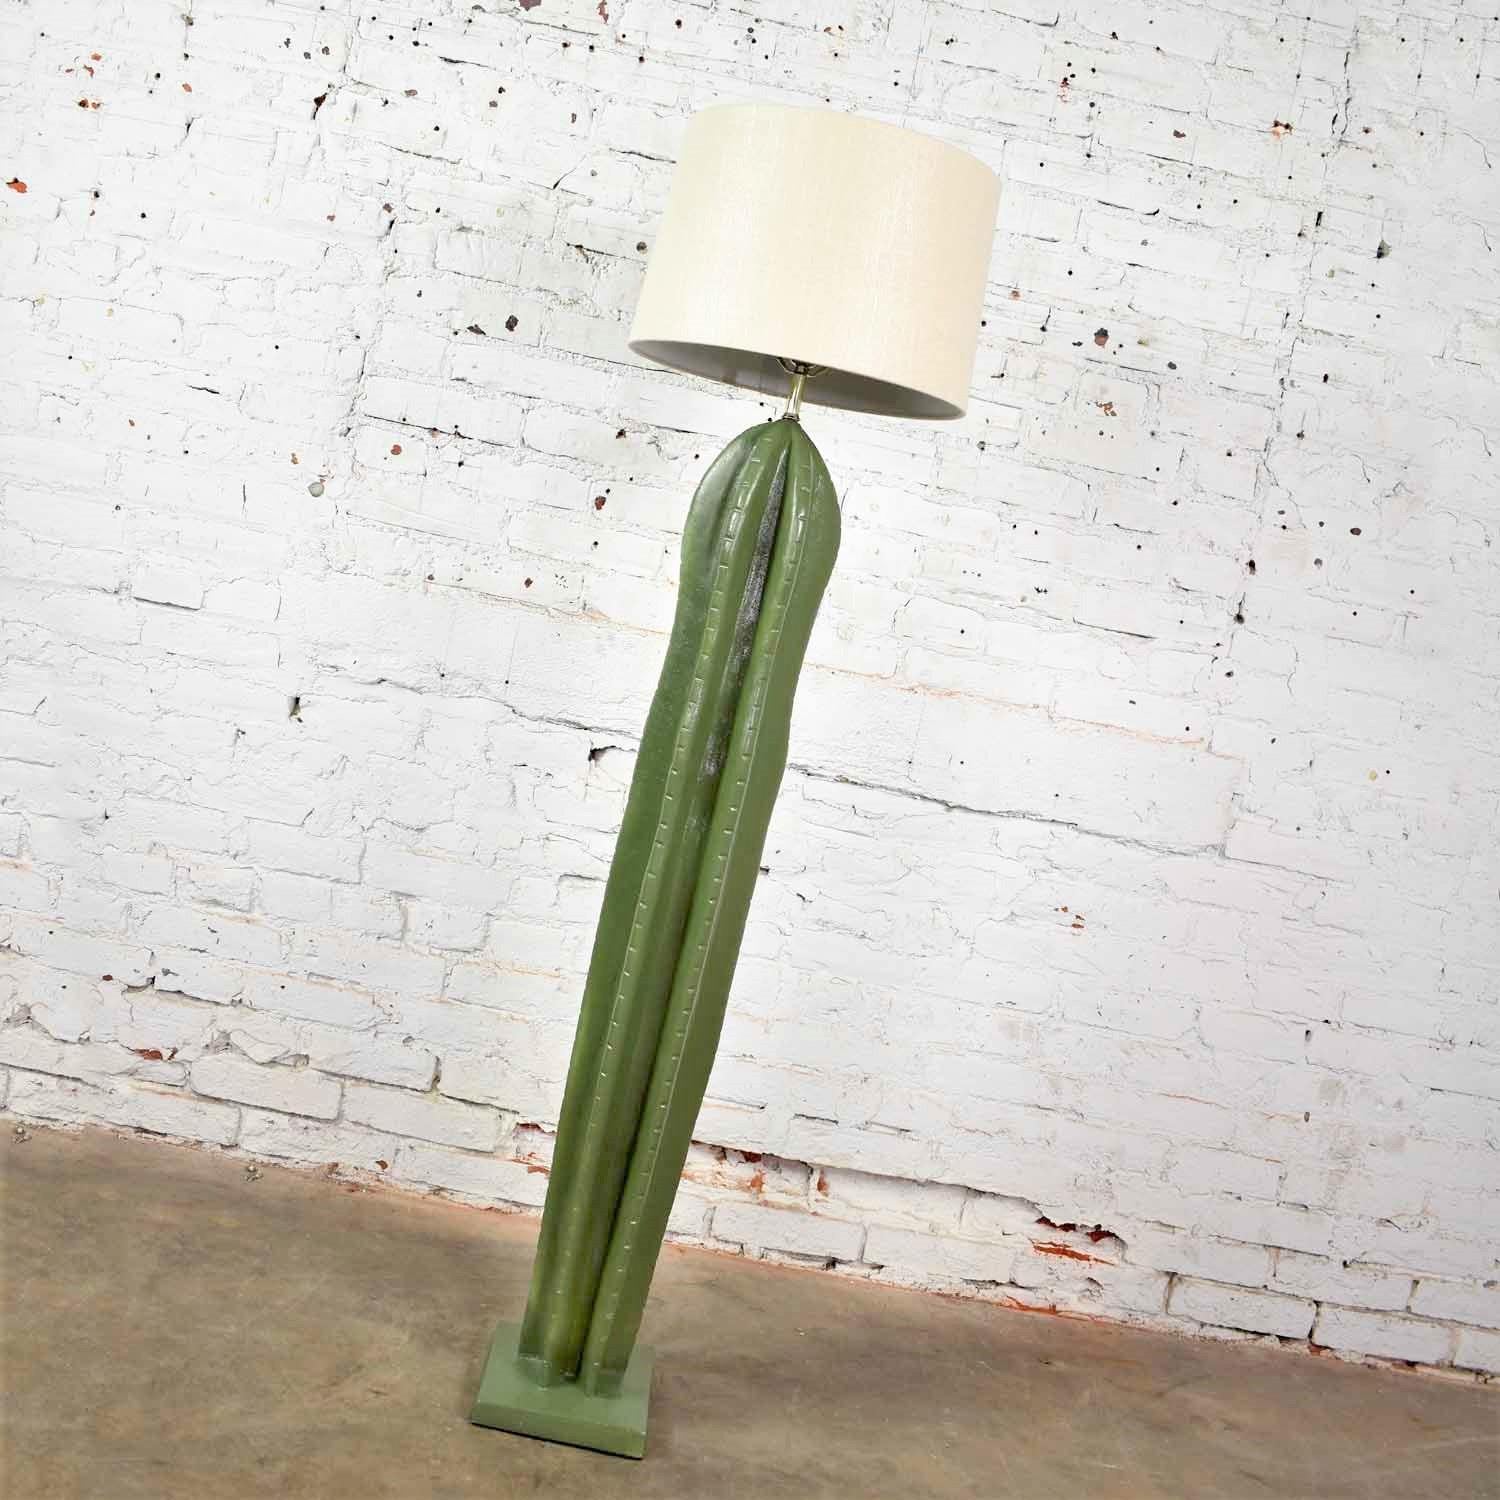 Fun organic modern faux cactus floor lamp made of plaster by Alsy. It is in fabulous vintage condition. It has a new coat of paint, new wiring, and a new drum shade. Please see photos. We will ship with or without the shade, circa 1980s.

No green